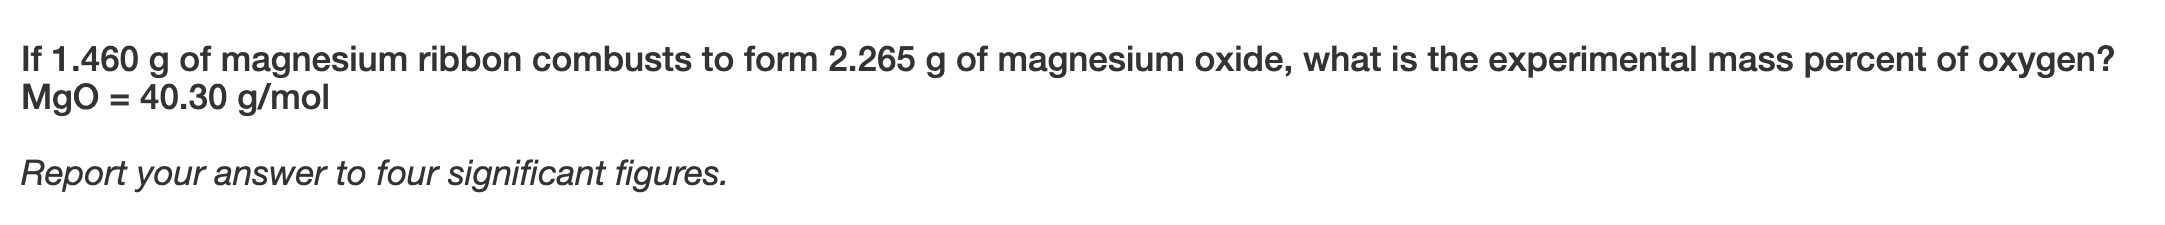 If 1.460 g of magnesium ribbon combusts to form 2.265 g of magnesium oxide, what is the experimental mass percent of oxygen?
MgO = 40.30 g/mol
Report your answer to four significant figures.
